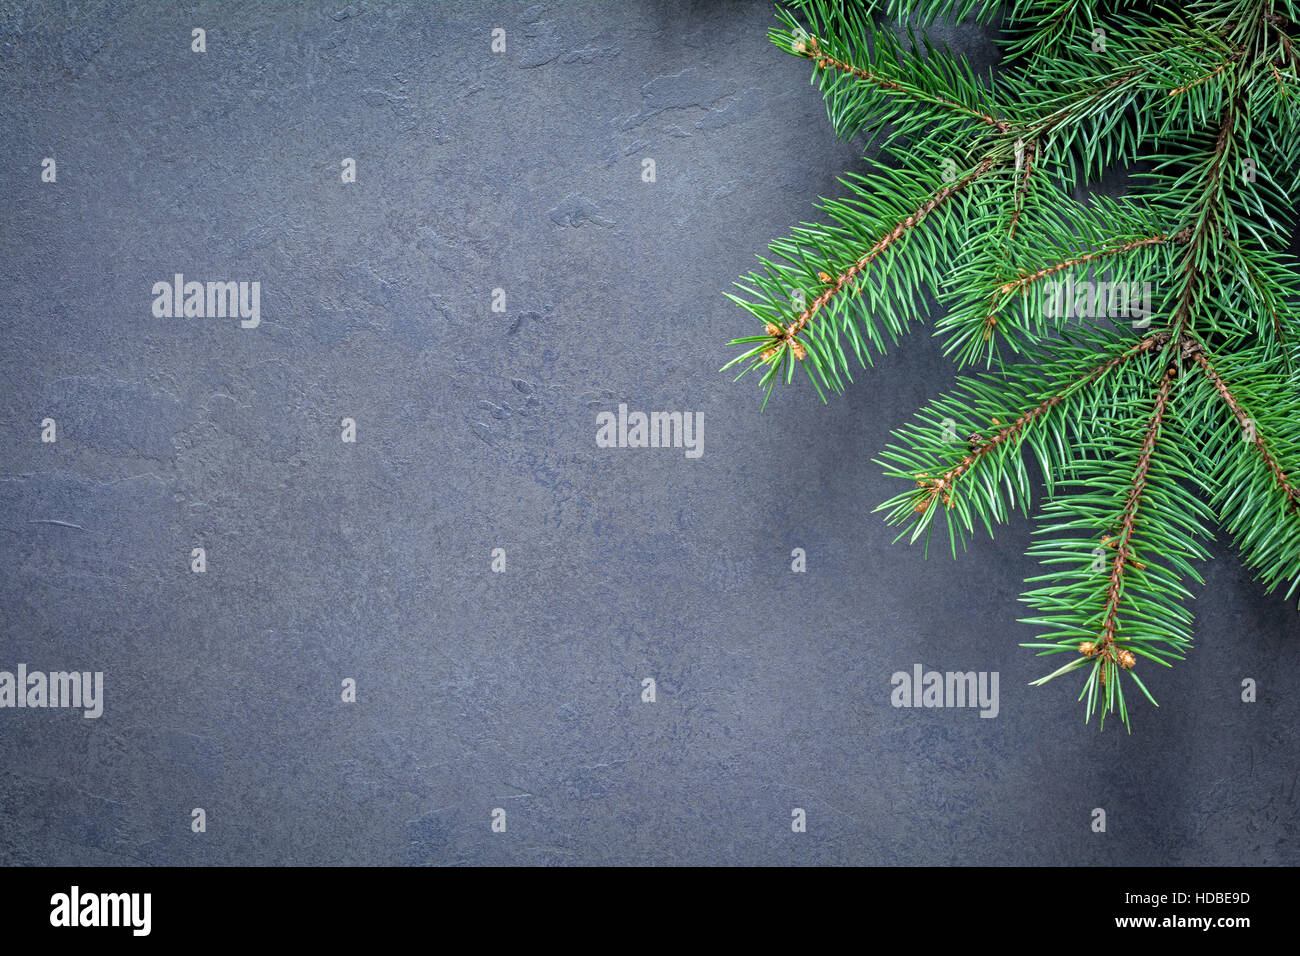 Fir tree on gray background. Christmas or New Year background Stock Photo